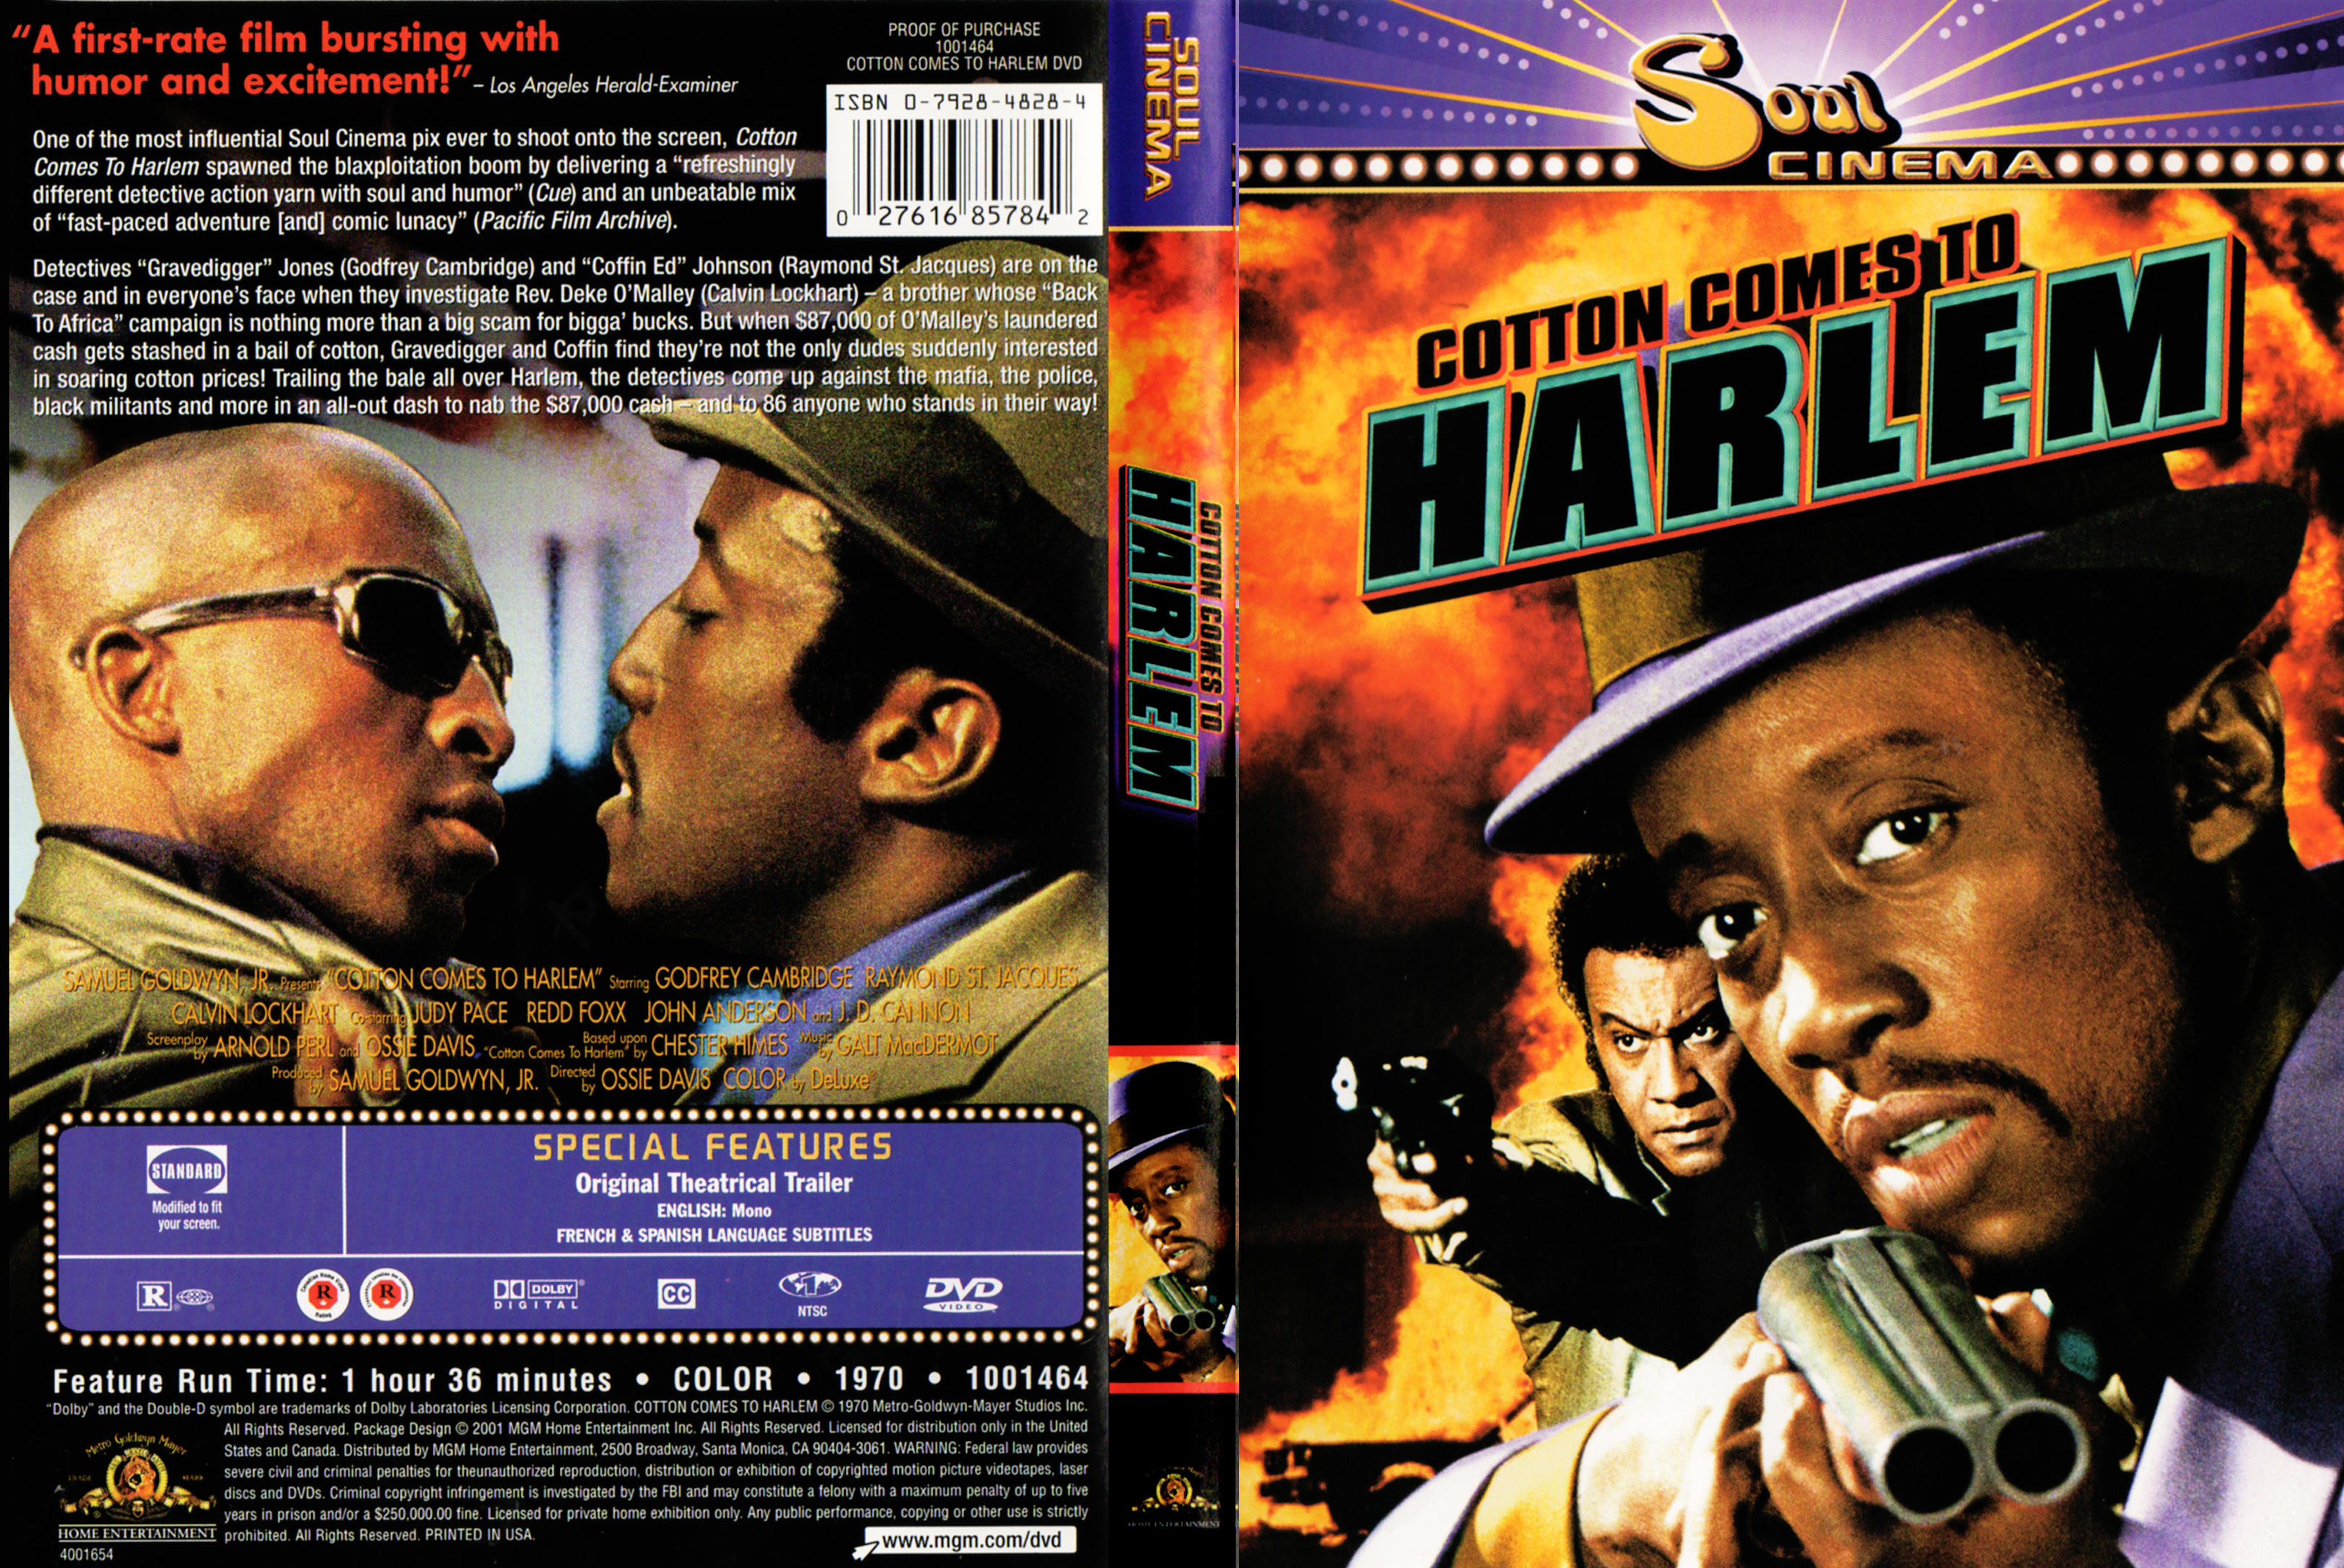 Jaquette DVD Cotton comes to Harlem